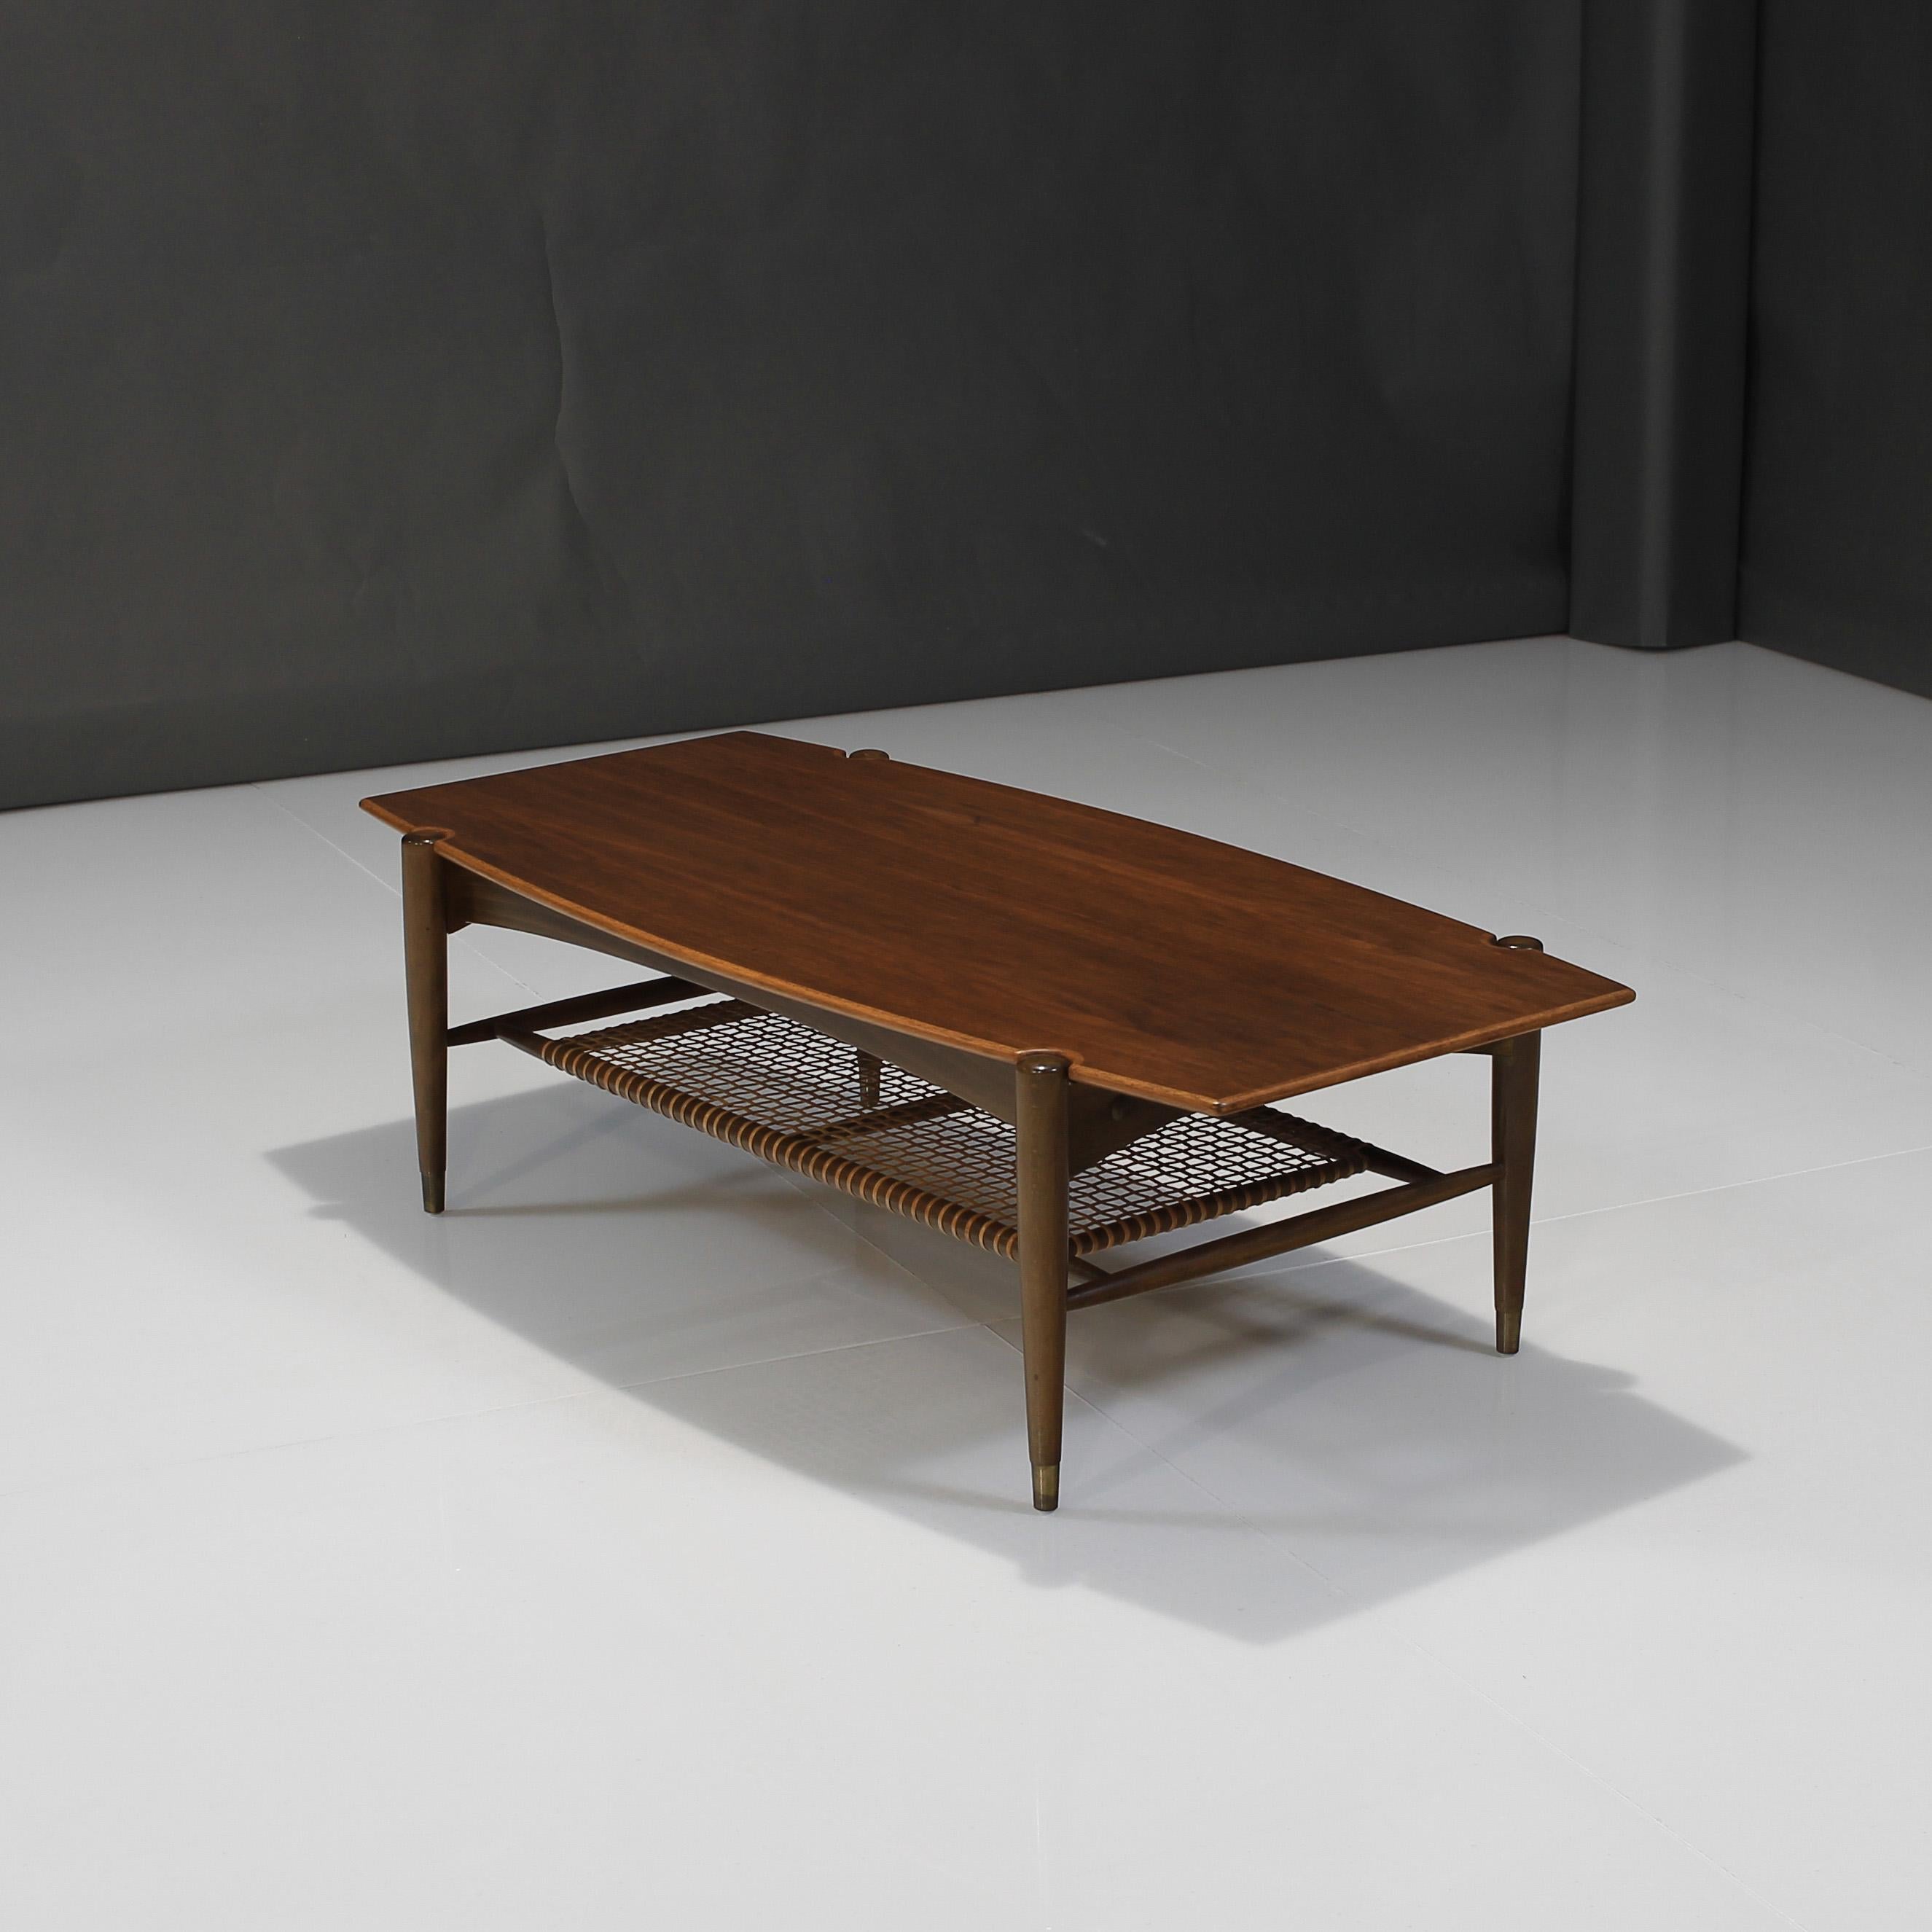 Swedish Mid-20th Century Teak and Cane Coffee Table by Folke Ohlsson